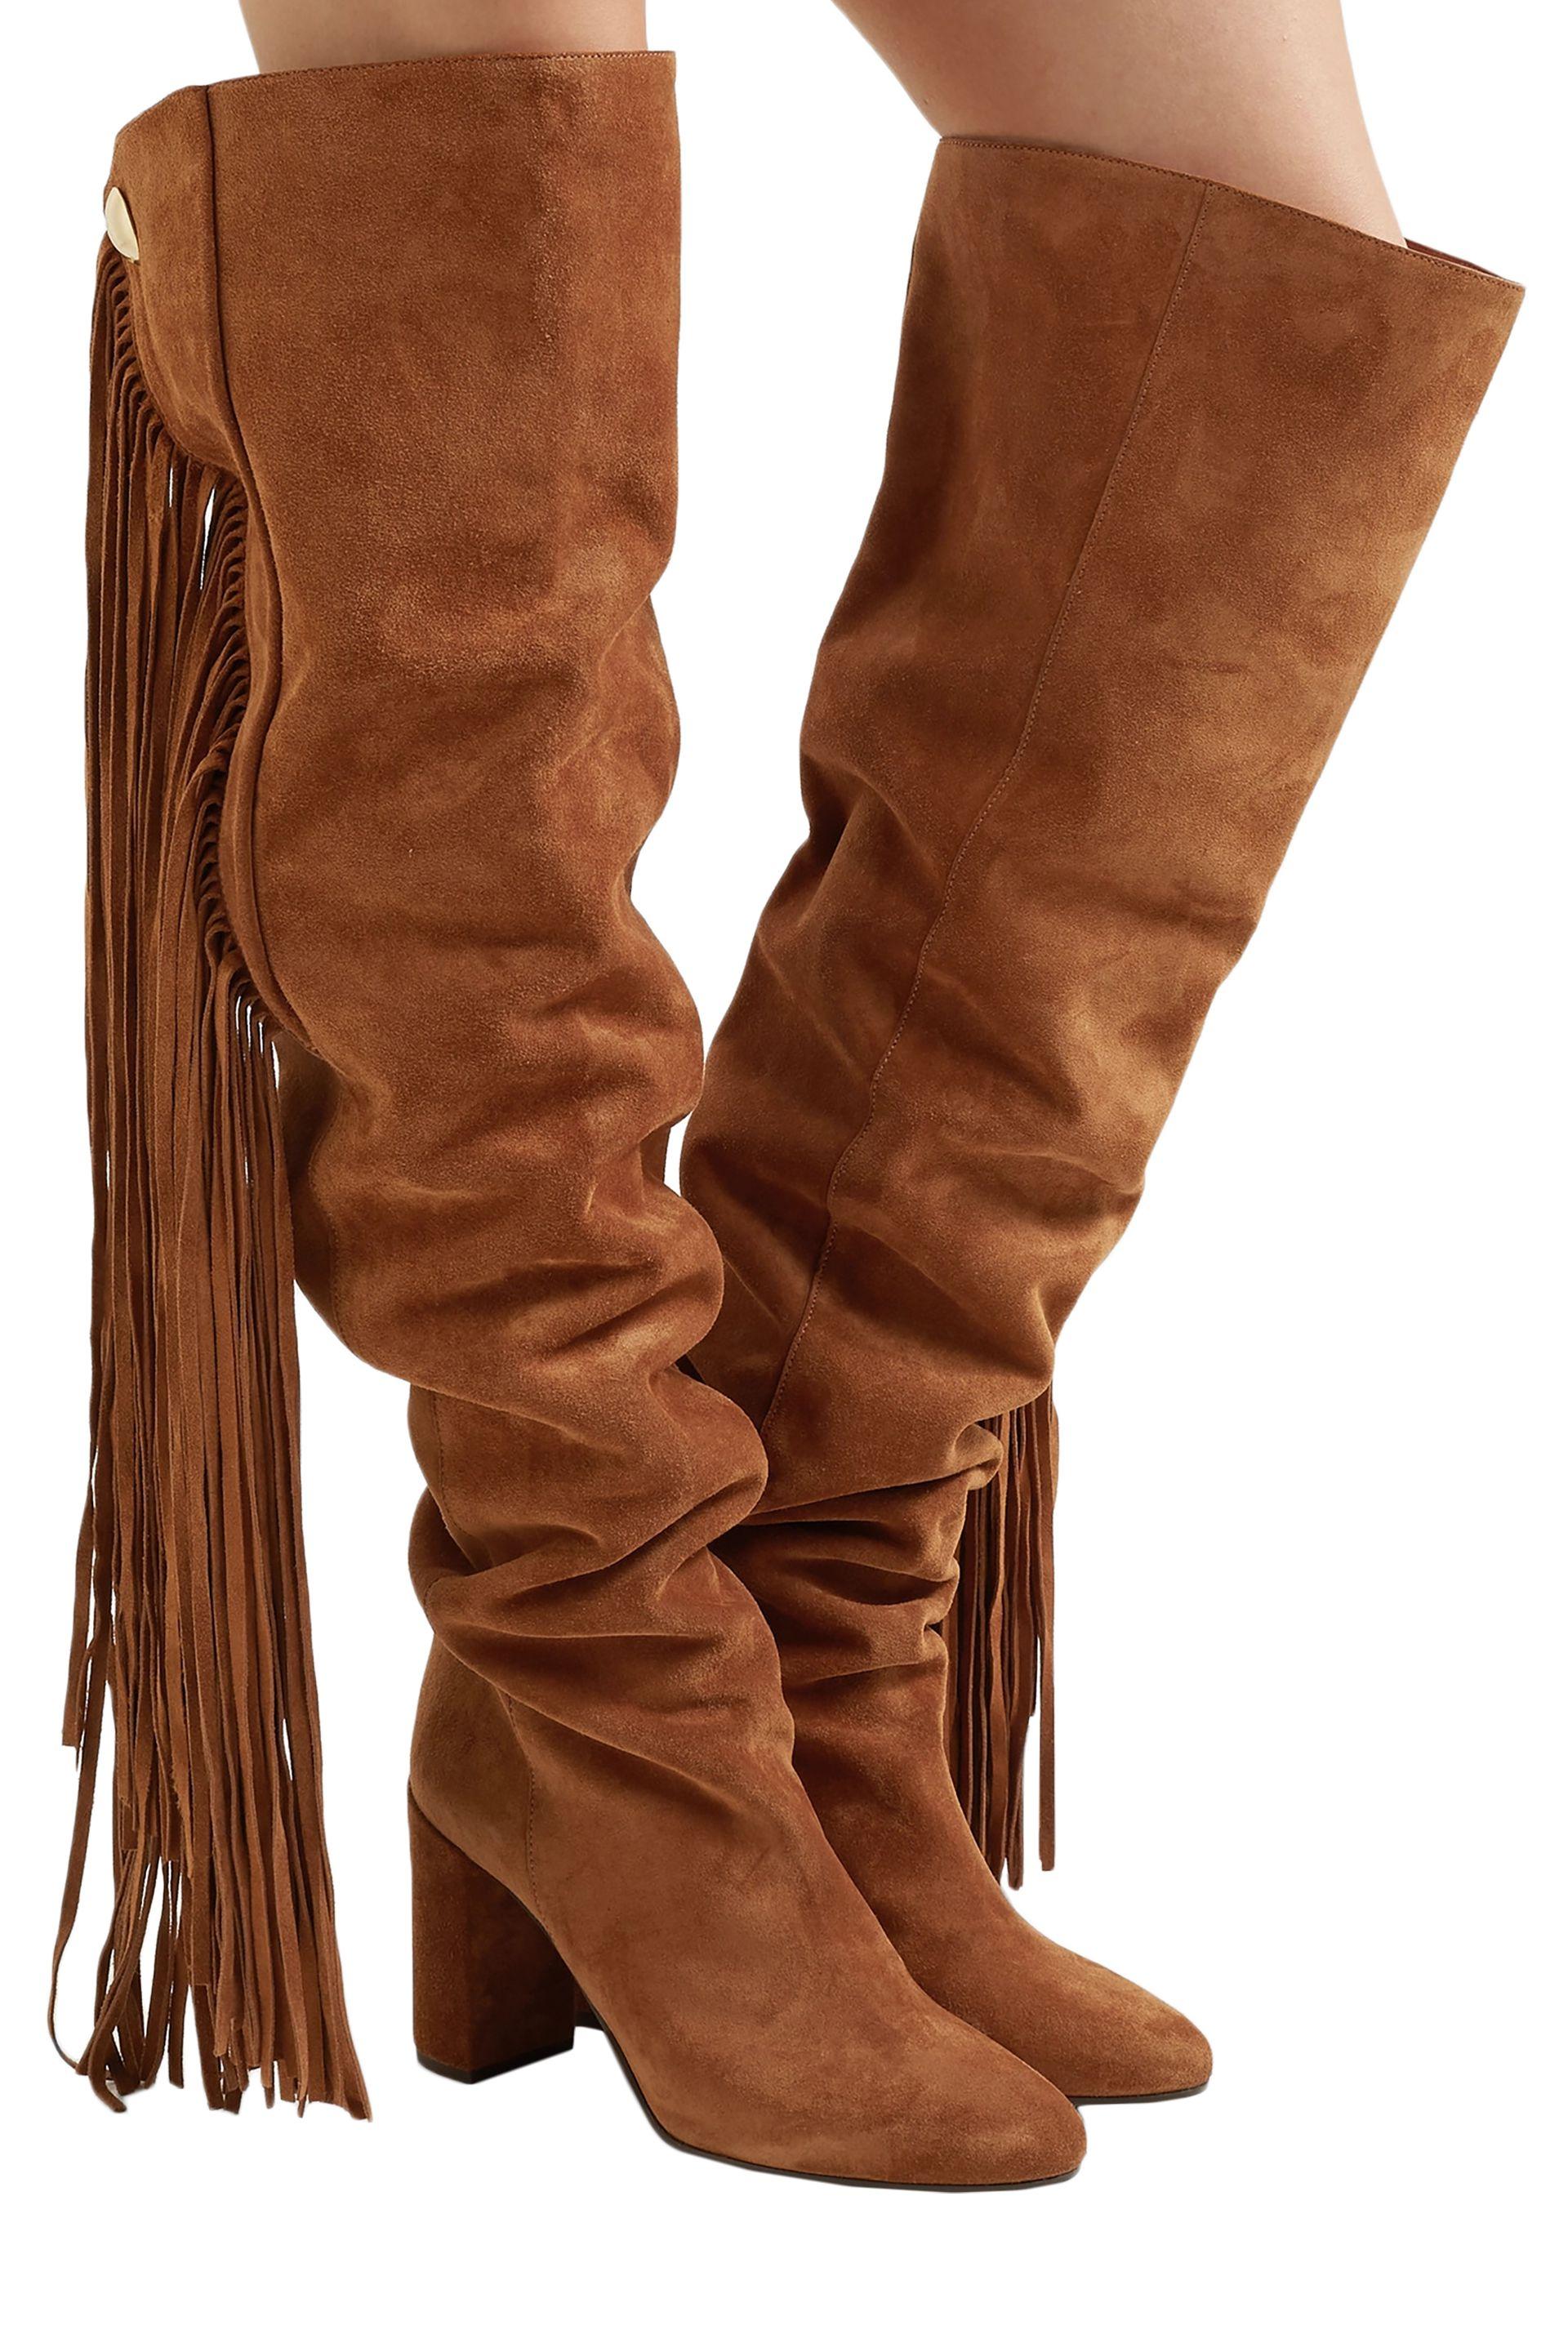 Chloé Chloé Fringed Suede Over-the-knee Boots Camel - Lyst